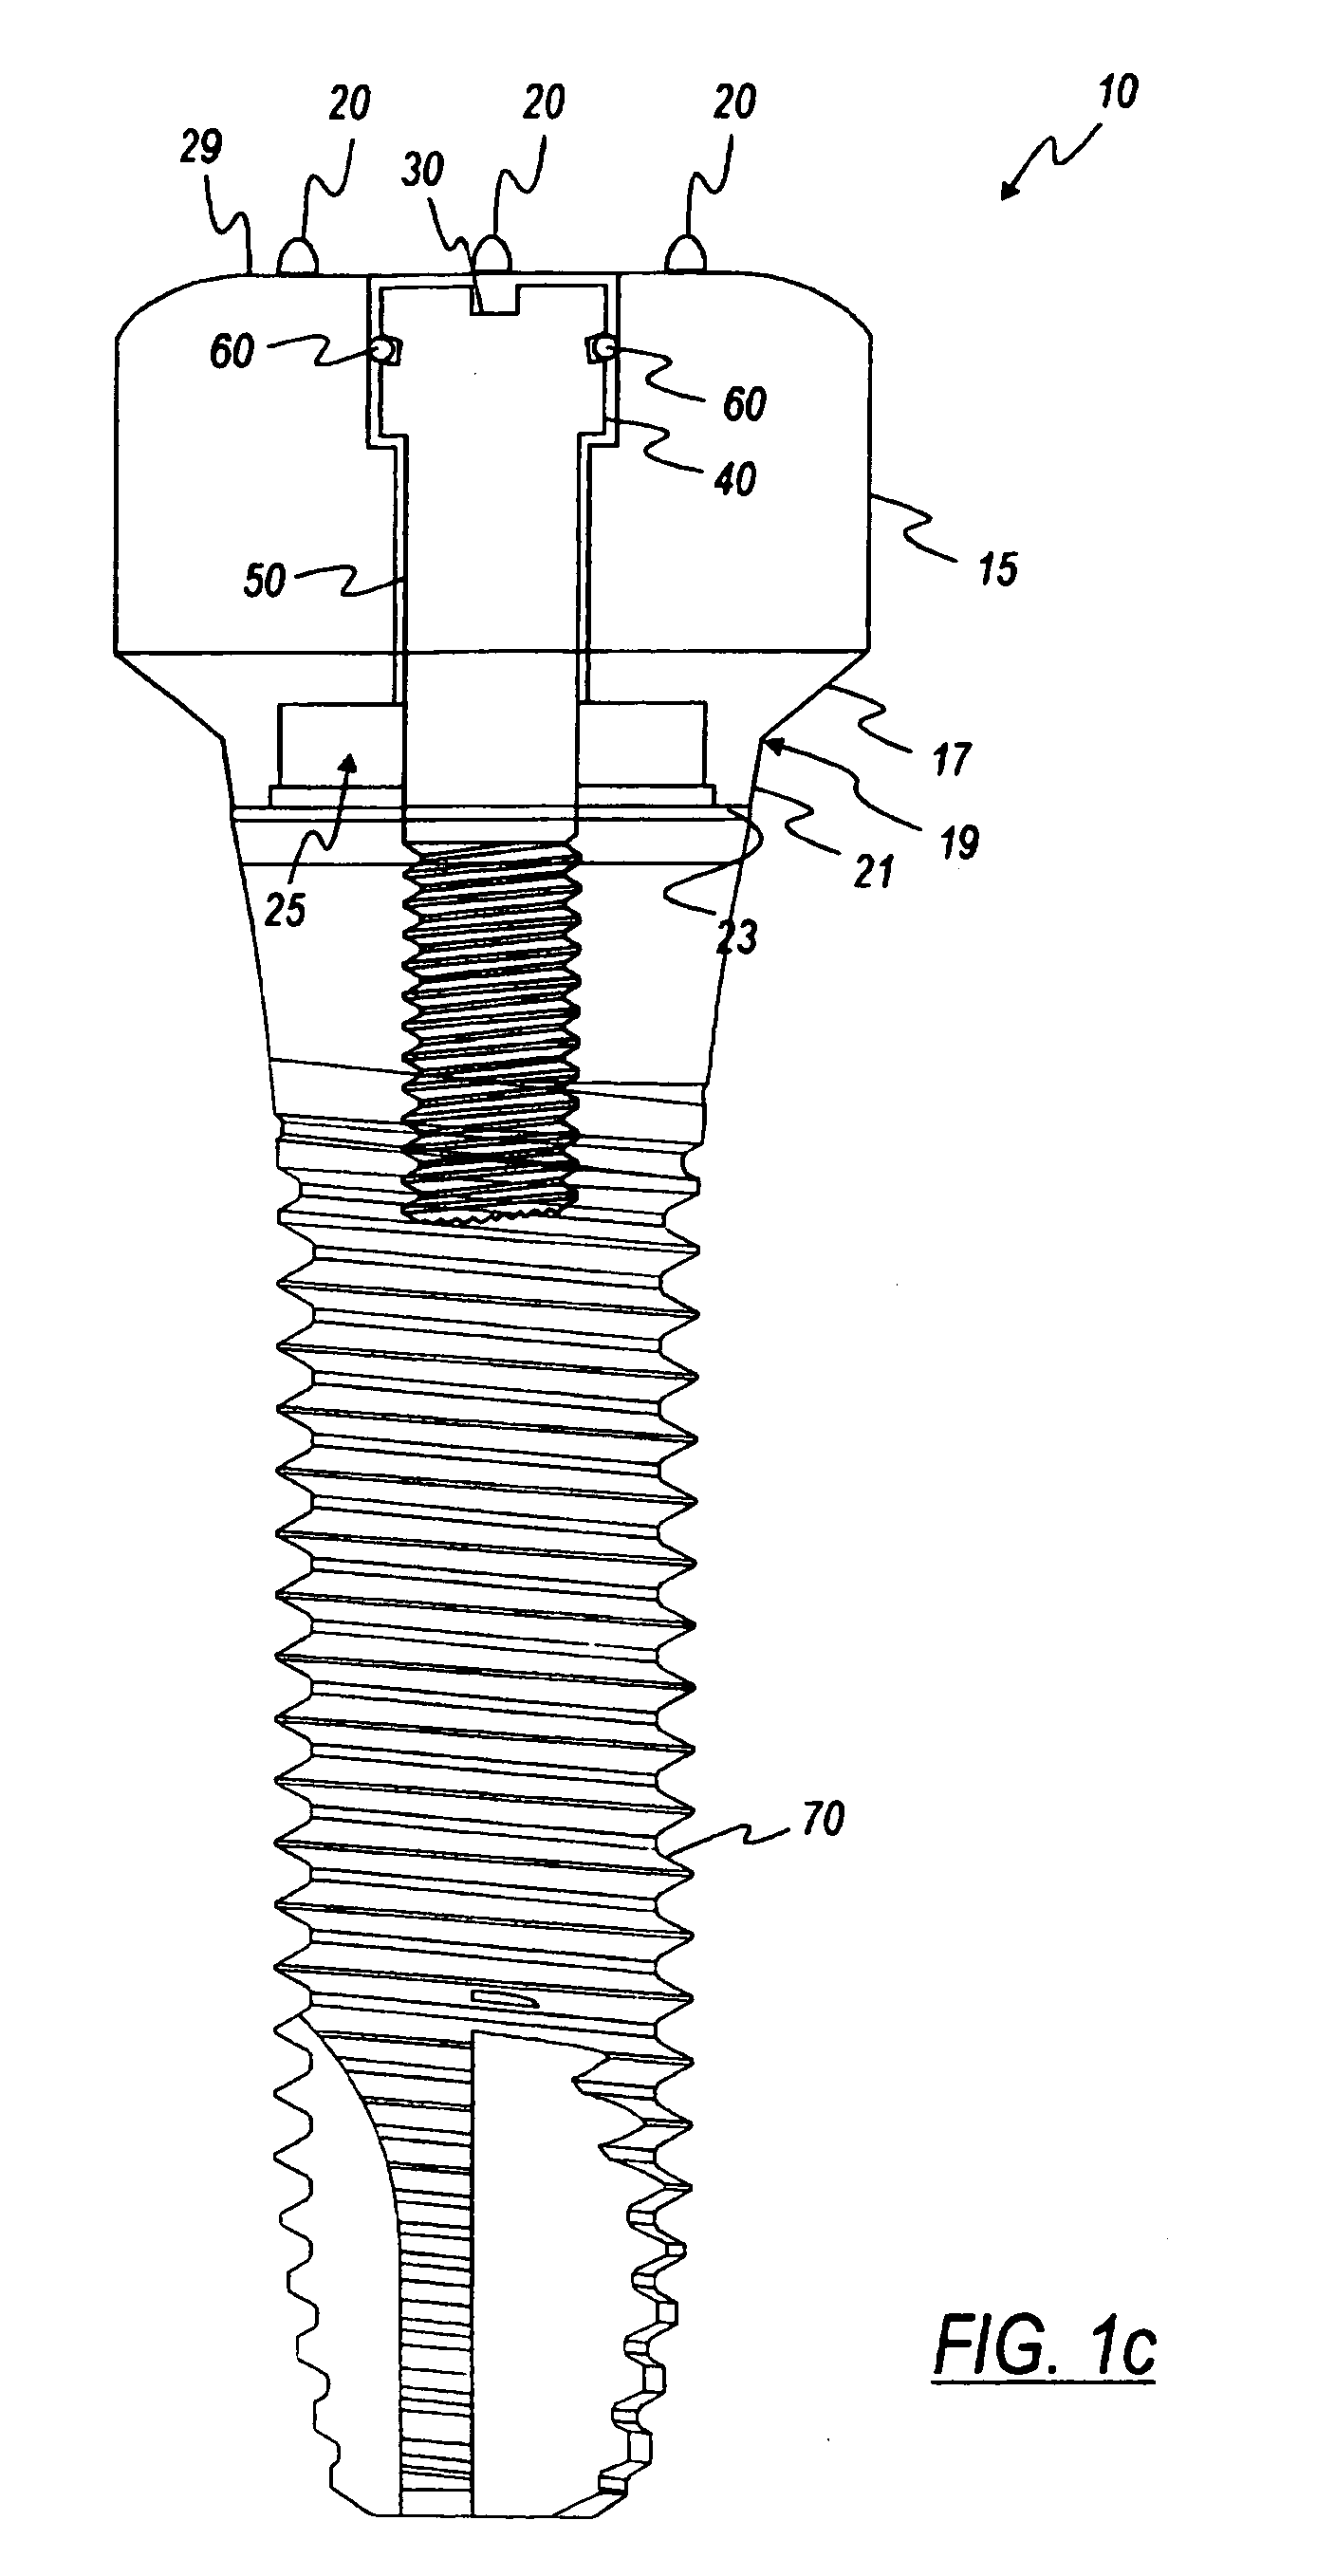 Healing components for use in taking impressions and methods for making the same